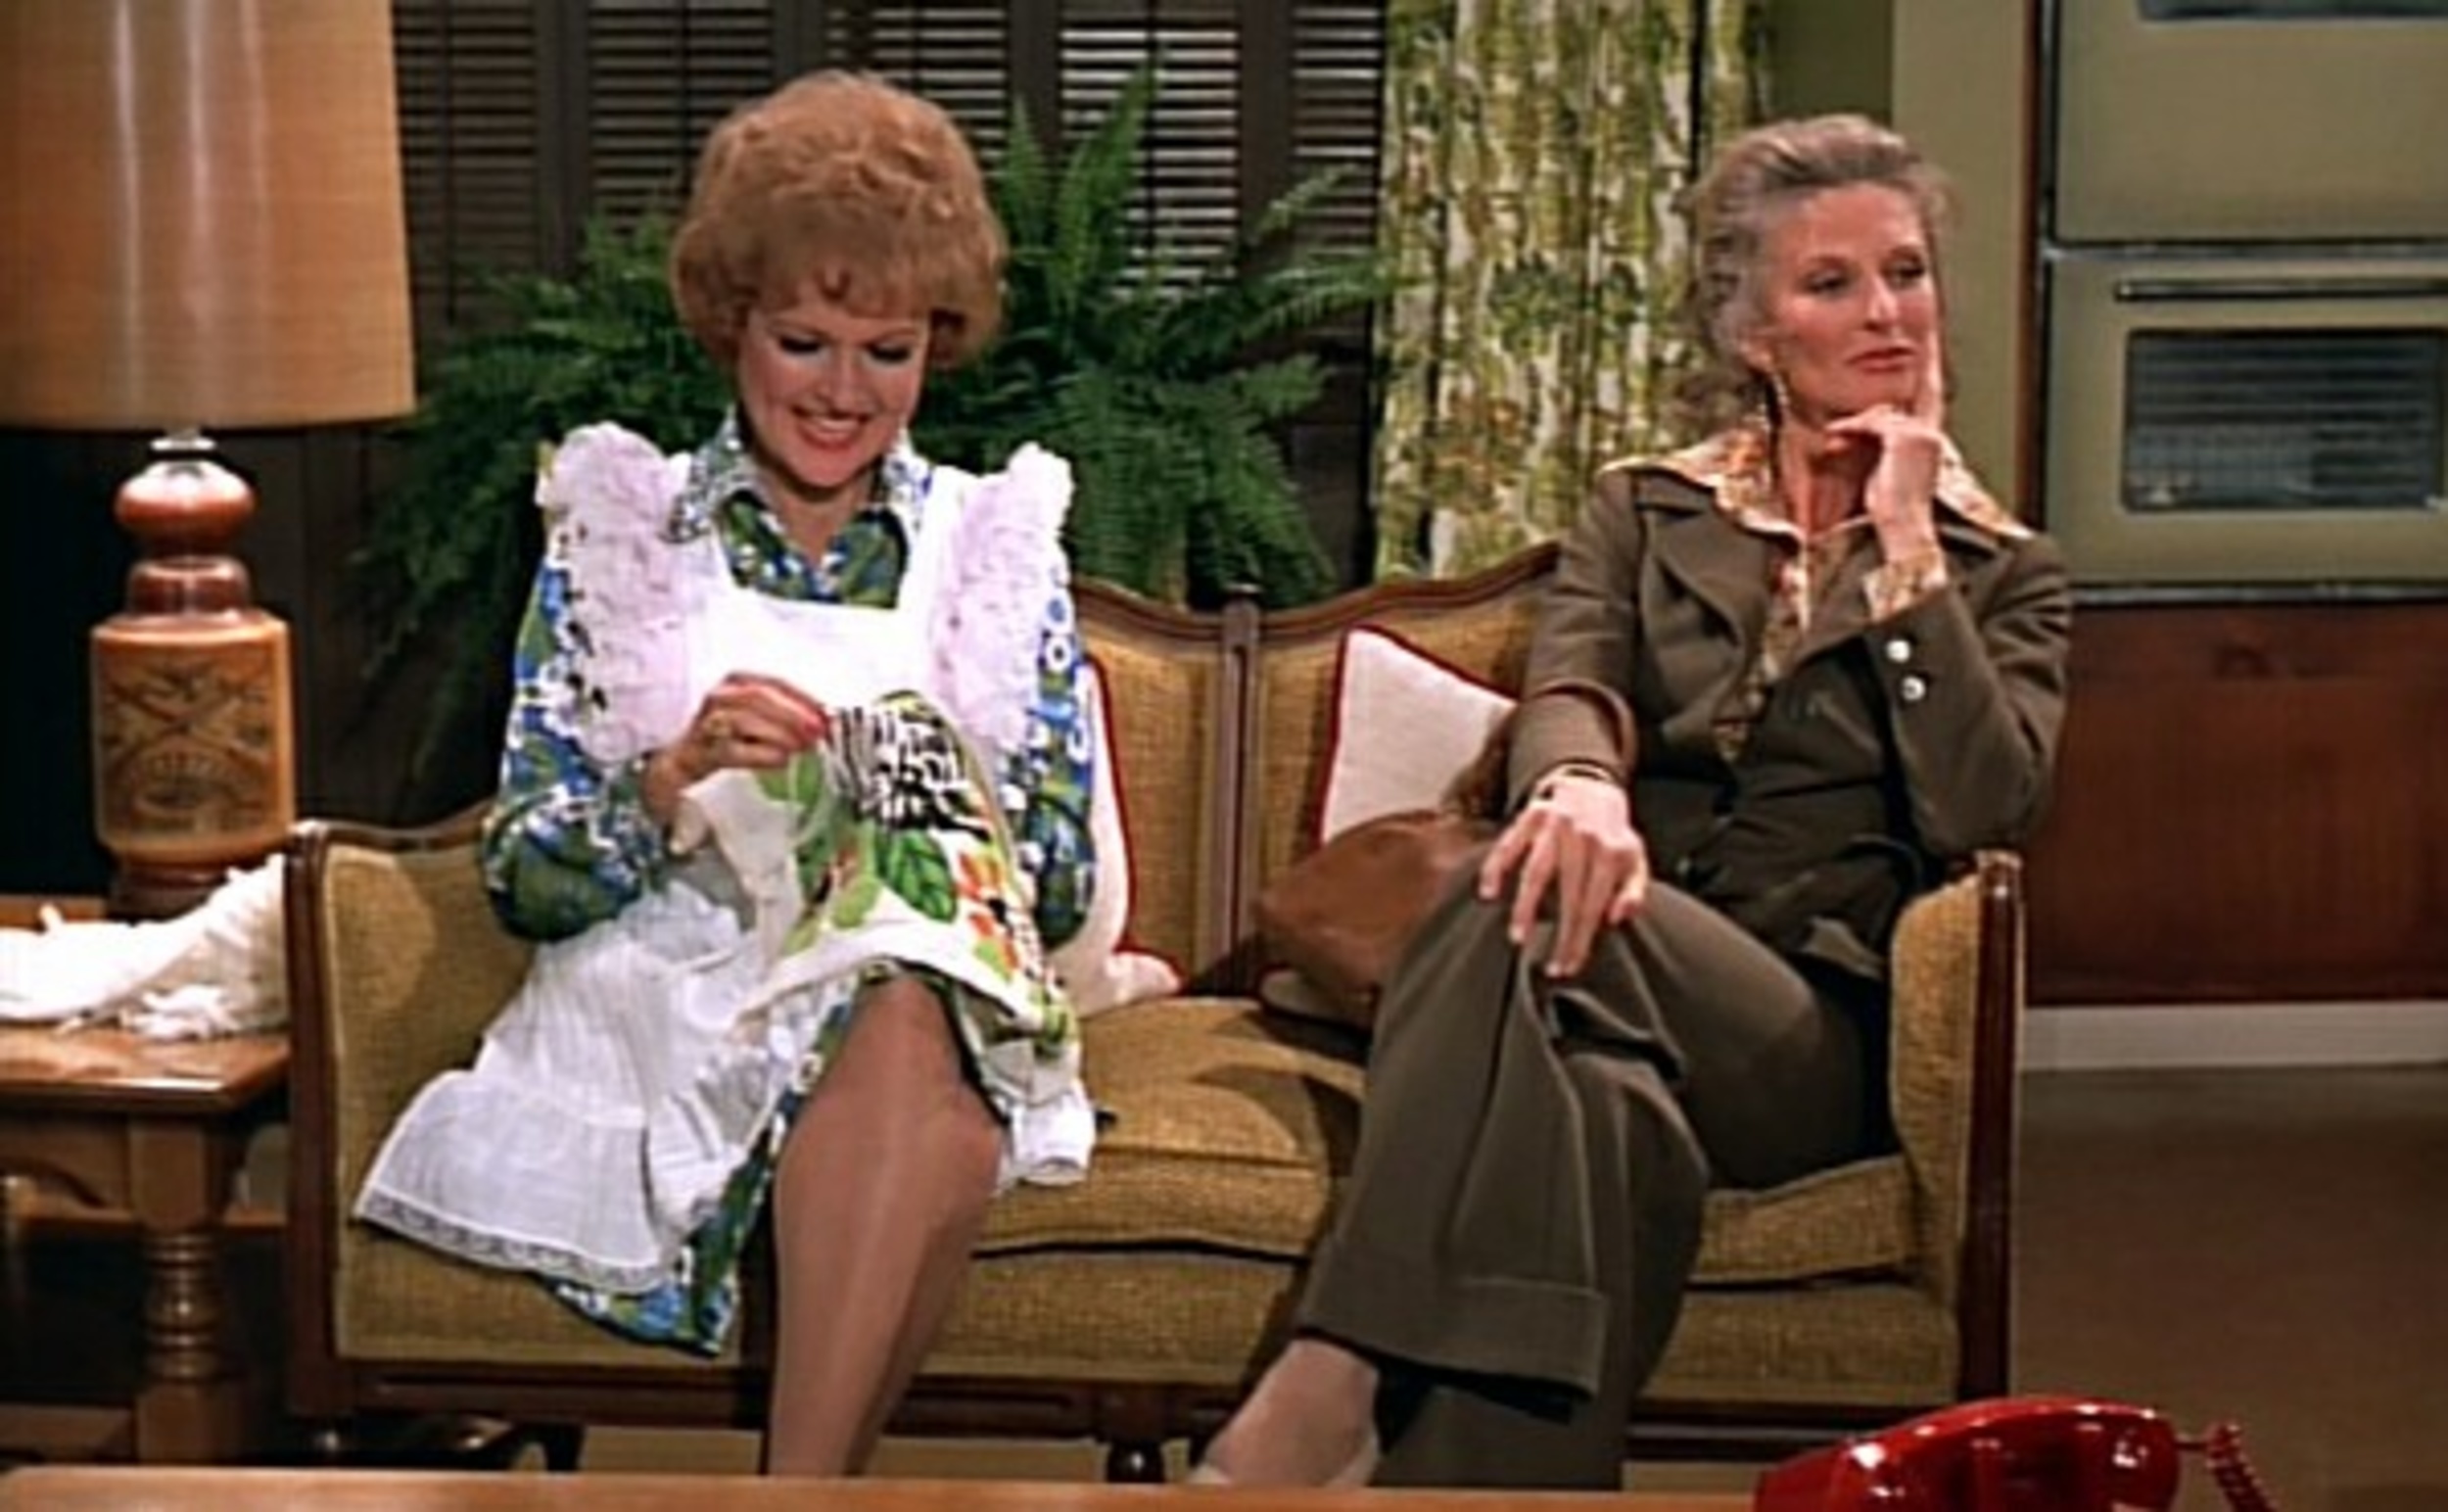 <p>“TV Guide” called this the 27th-best episode of TV back in 1997, and while we aren’t quite as high on it, we do still have a spot for it in our top five. This episode is the first appearance of White as Sue Ann, the Happy Homemaker of WJM. Of course, she’s also a bit of a homewrecker, as her man-eating appetite has come for Lars, Phyllis’ never-seen husband. Phyllis is a polarizing character, but she’s used well here.</p>